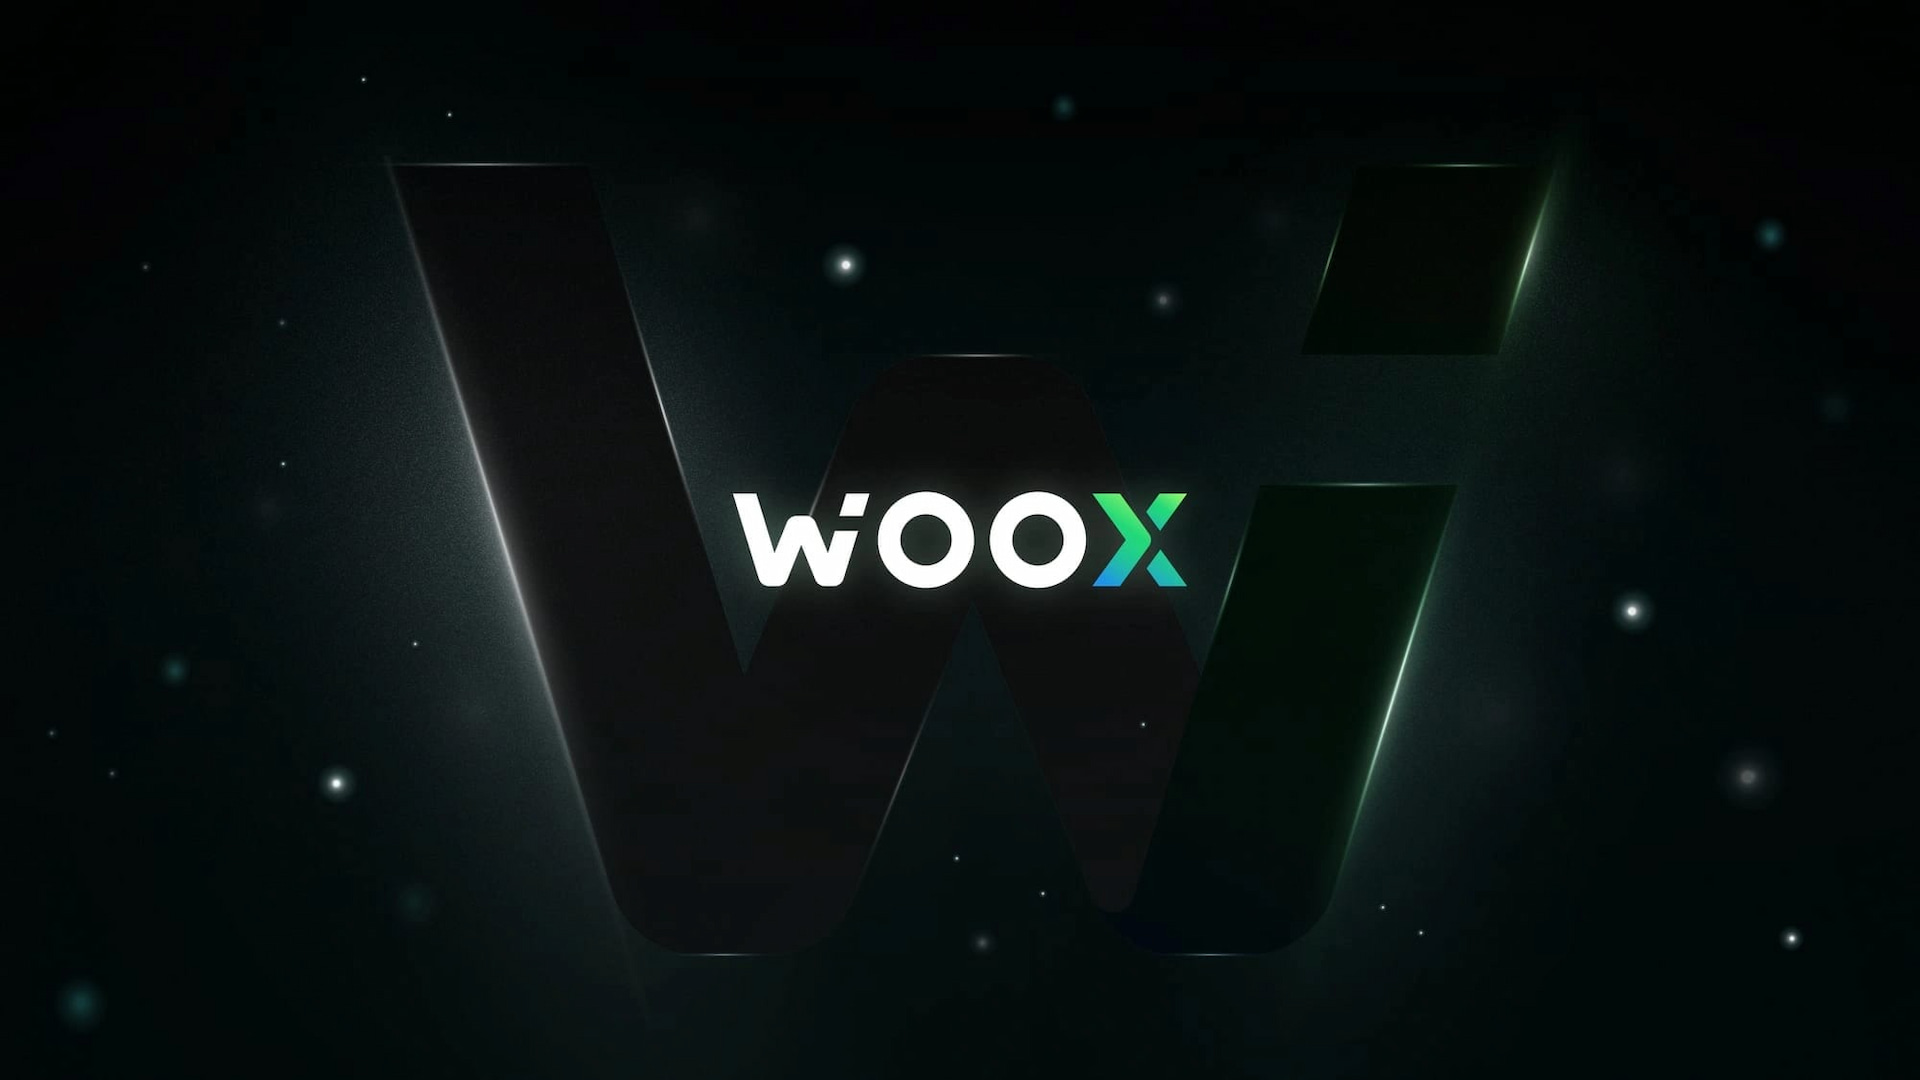 WOO X and OpenTrade launch RWA Earn Vaults in line with TradFi-led digital finance shift